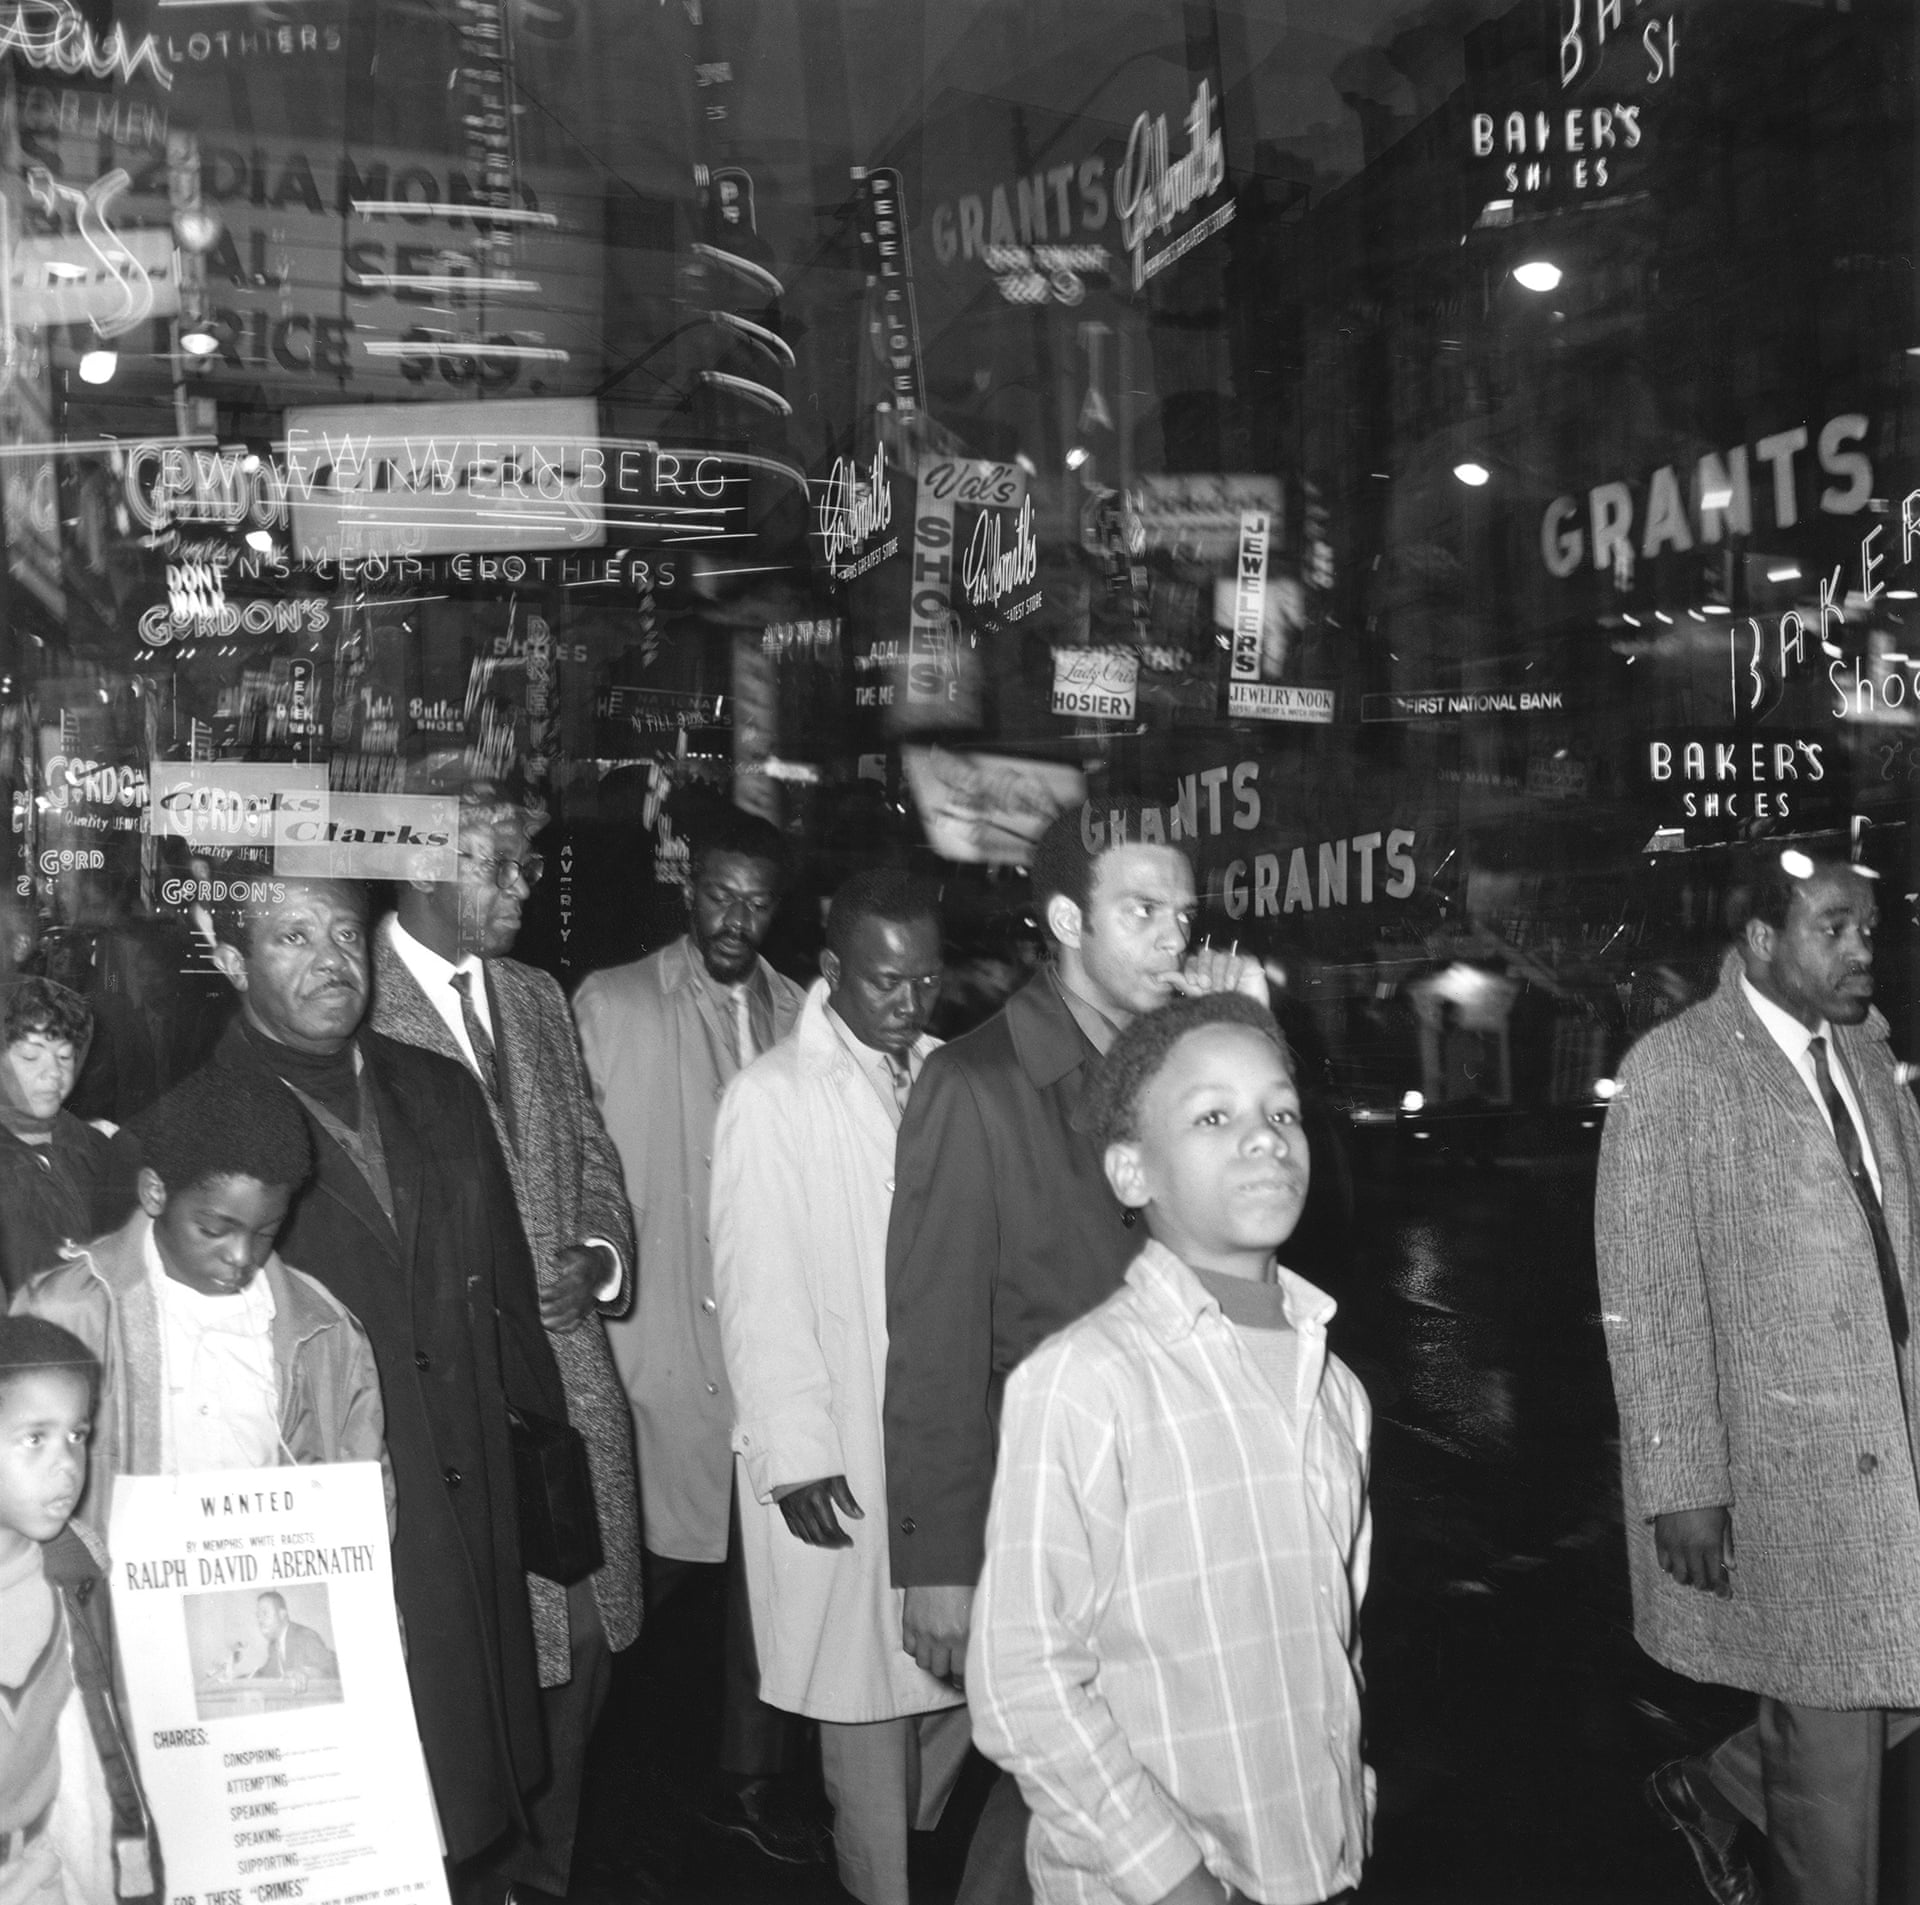 Double exposure of a nighttime march, no date